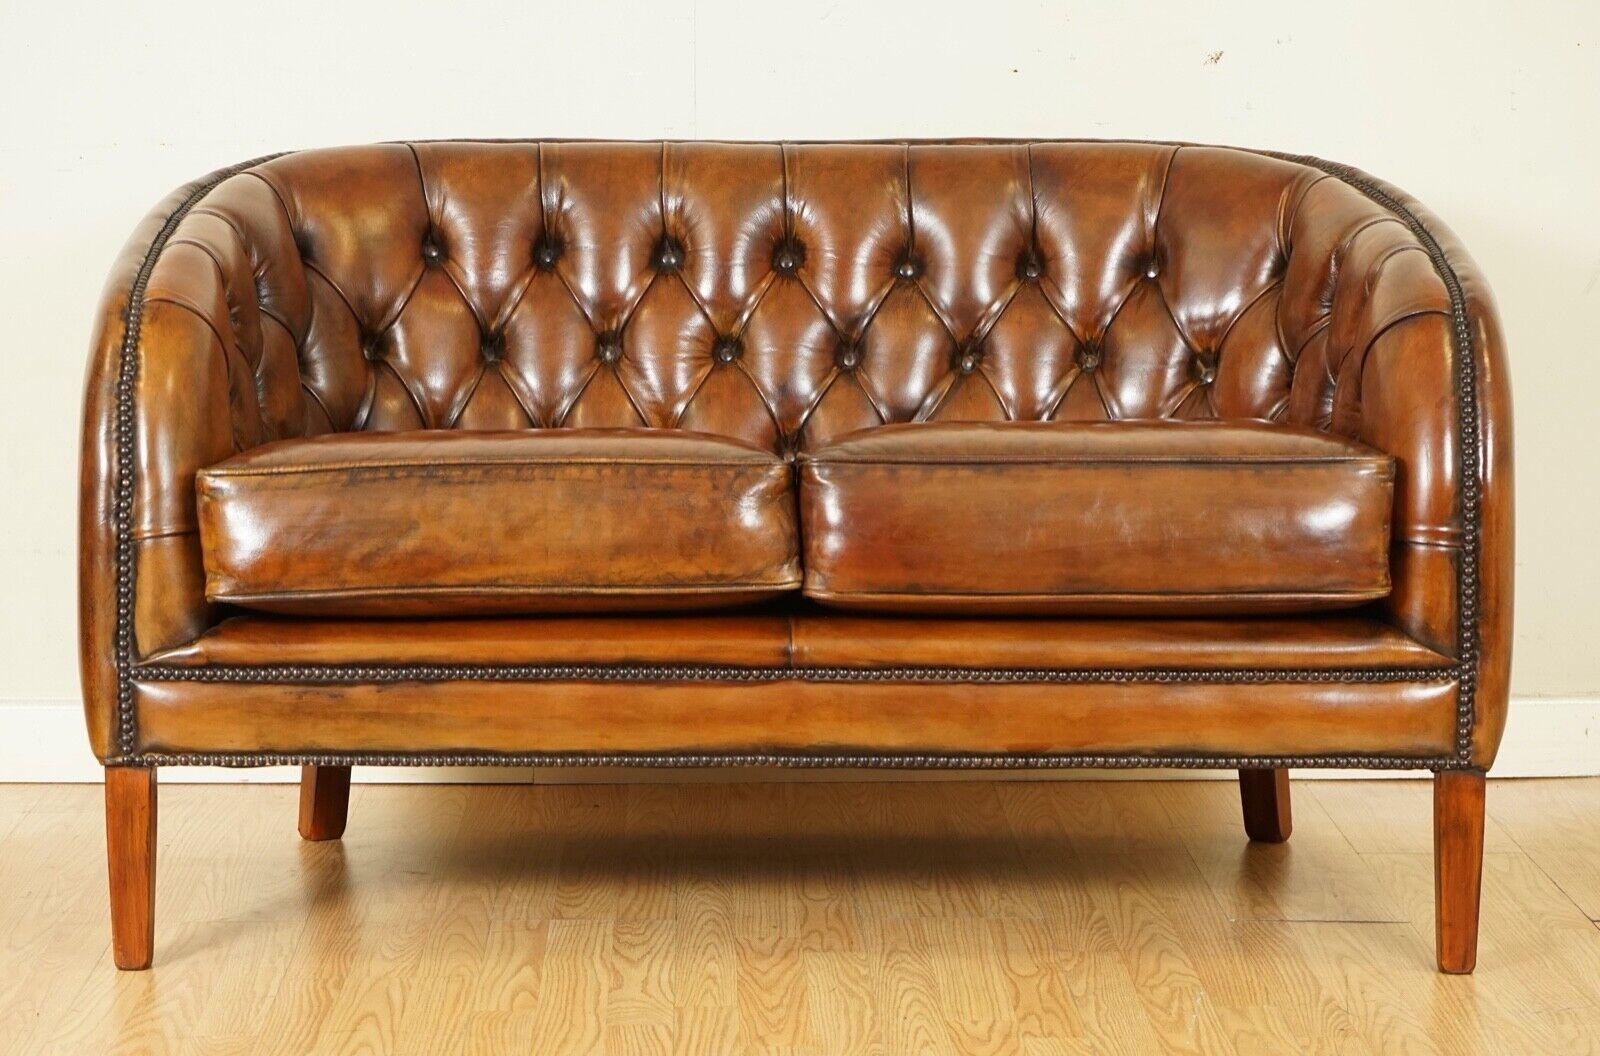 We are delighted to present this Gorgeous Art Deco fully restored whiskey brown hand-dyed leather sofa.

Condition-wise, the sofa has been fully restored, washed back, and hand dyed six times, antiqued, sealed and waxed. The idea with this kind of